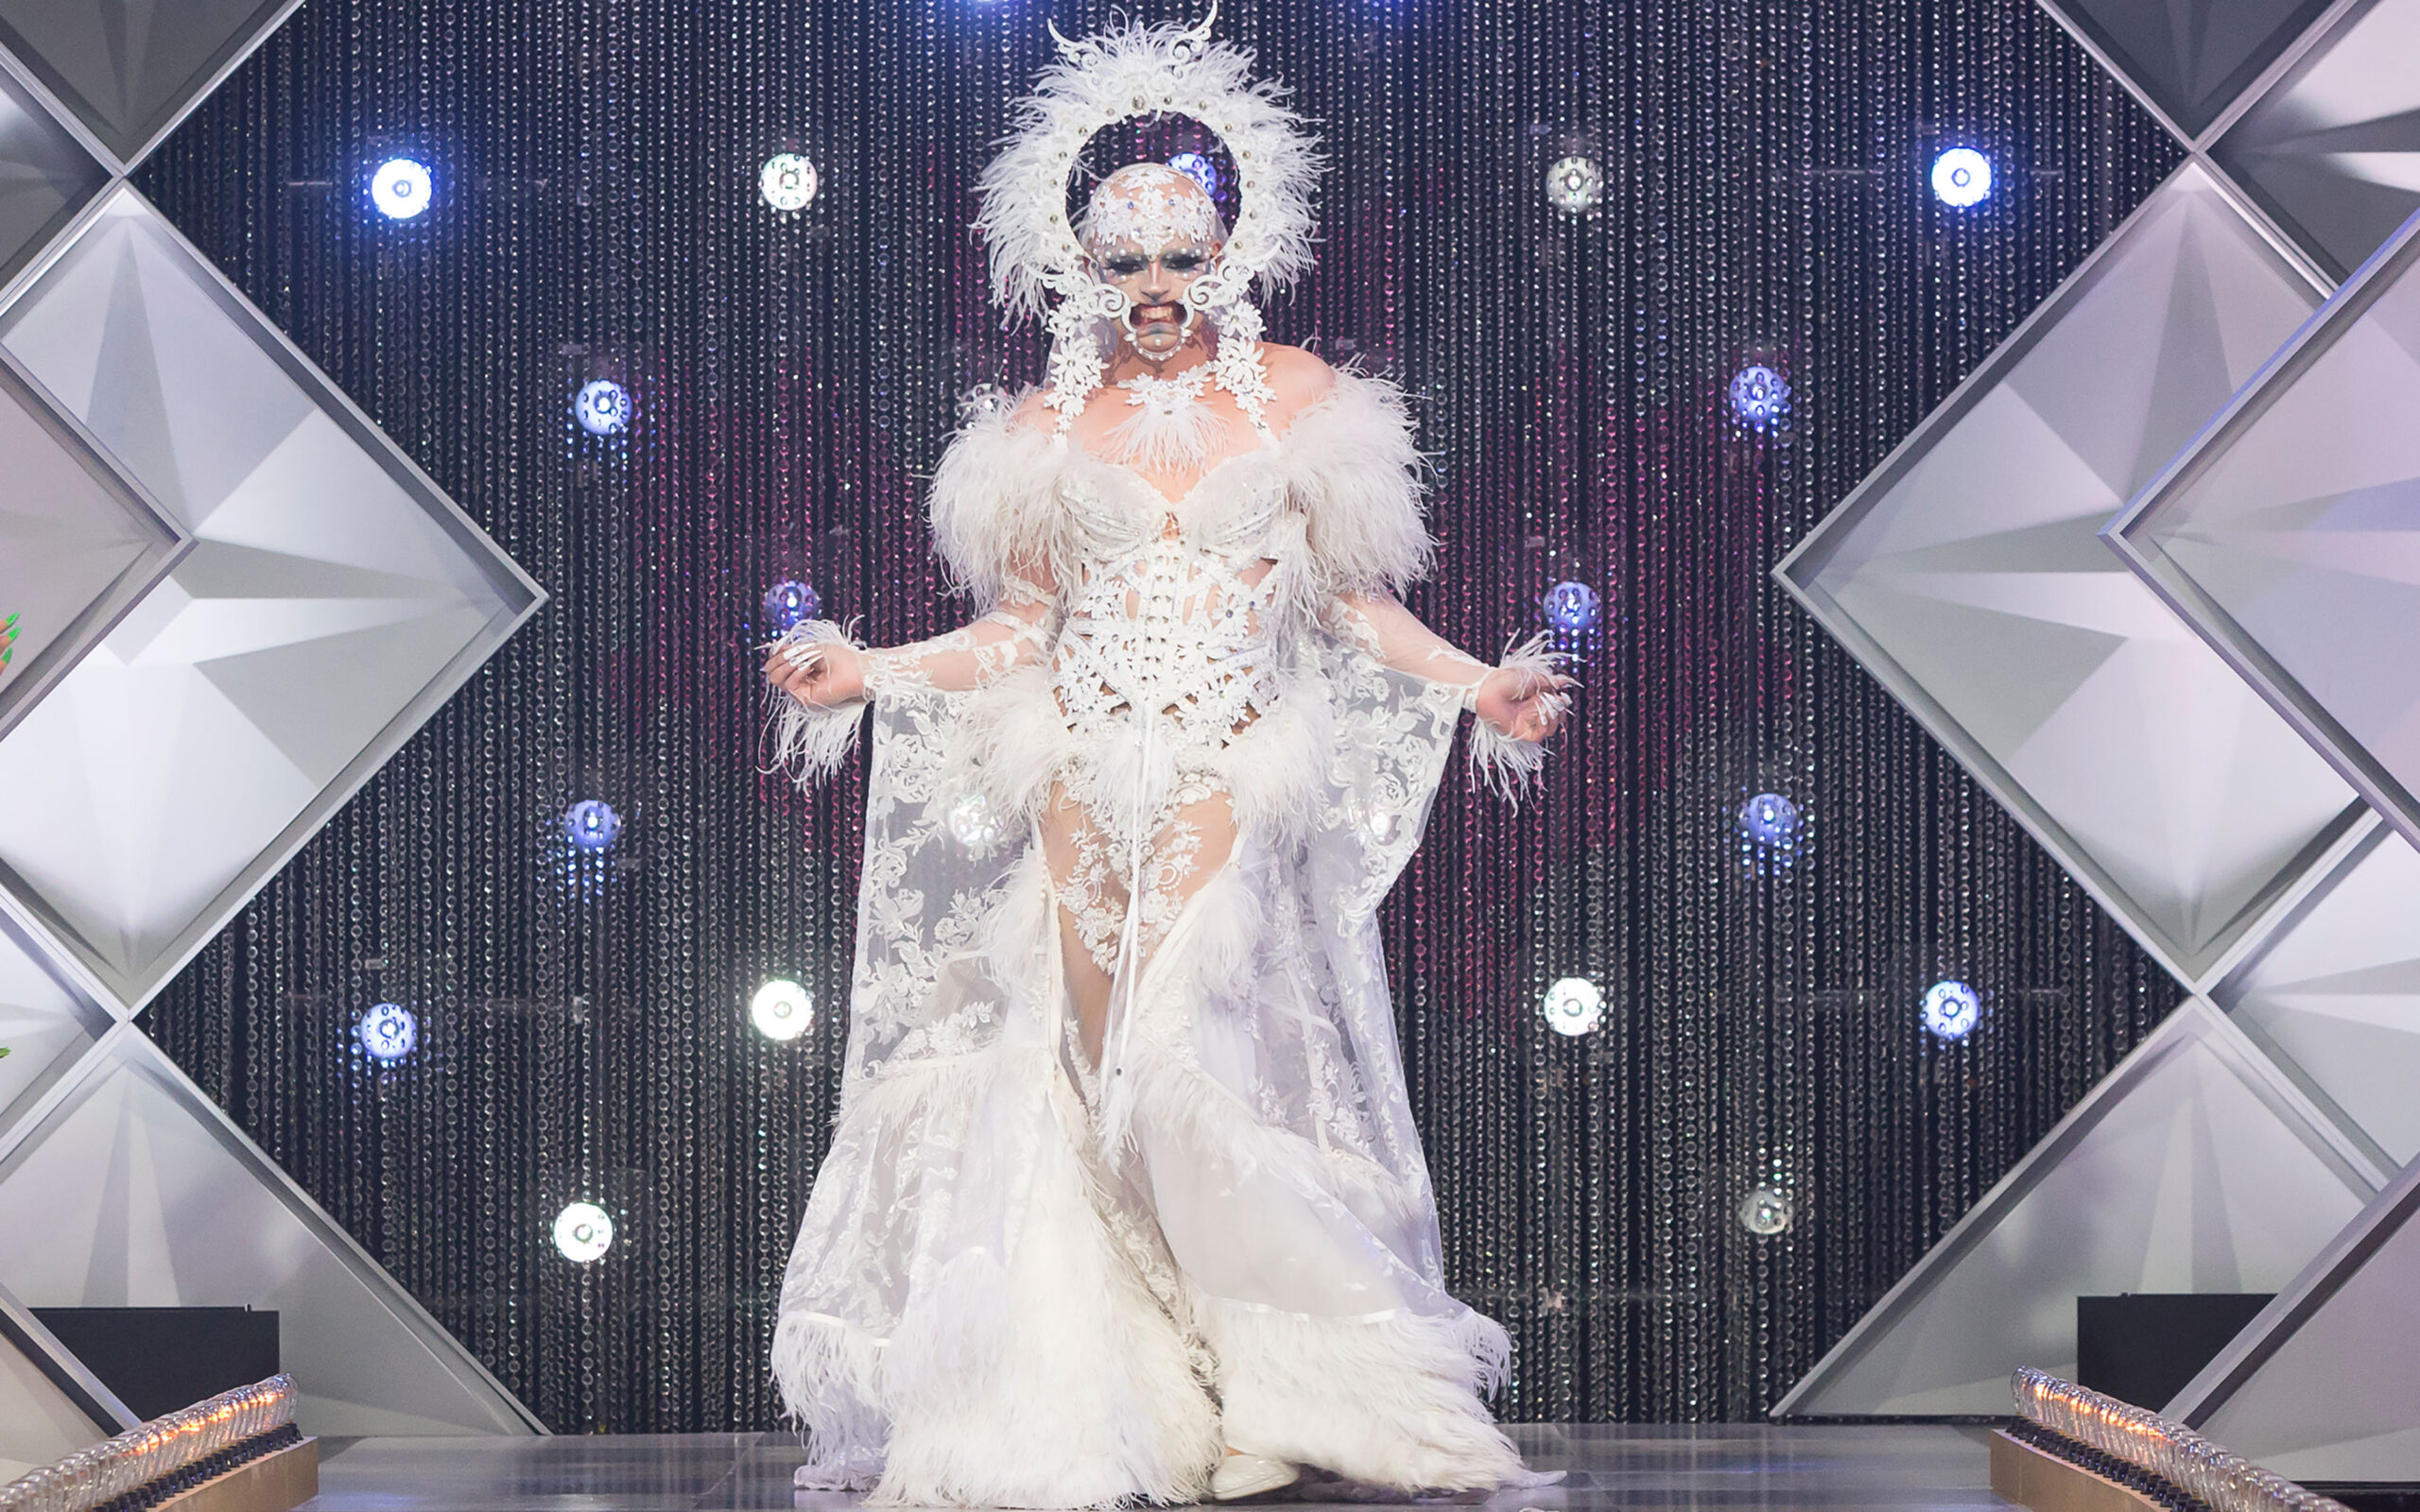 canada’s-drag-race-winner-icesis-couture-on-that-finale-look